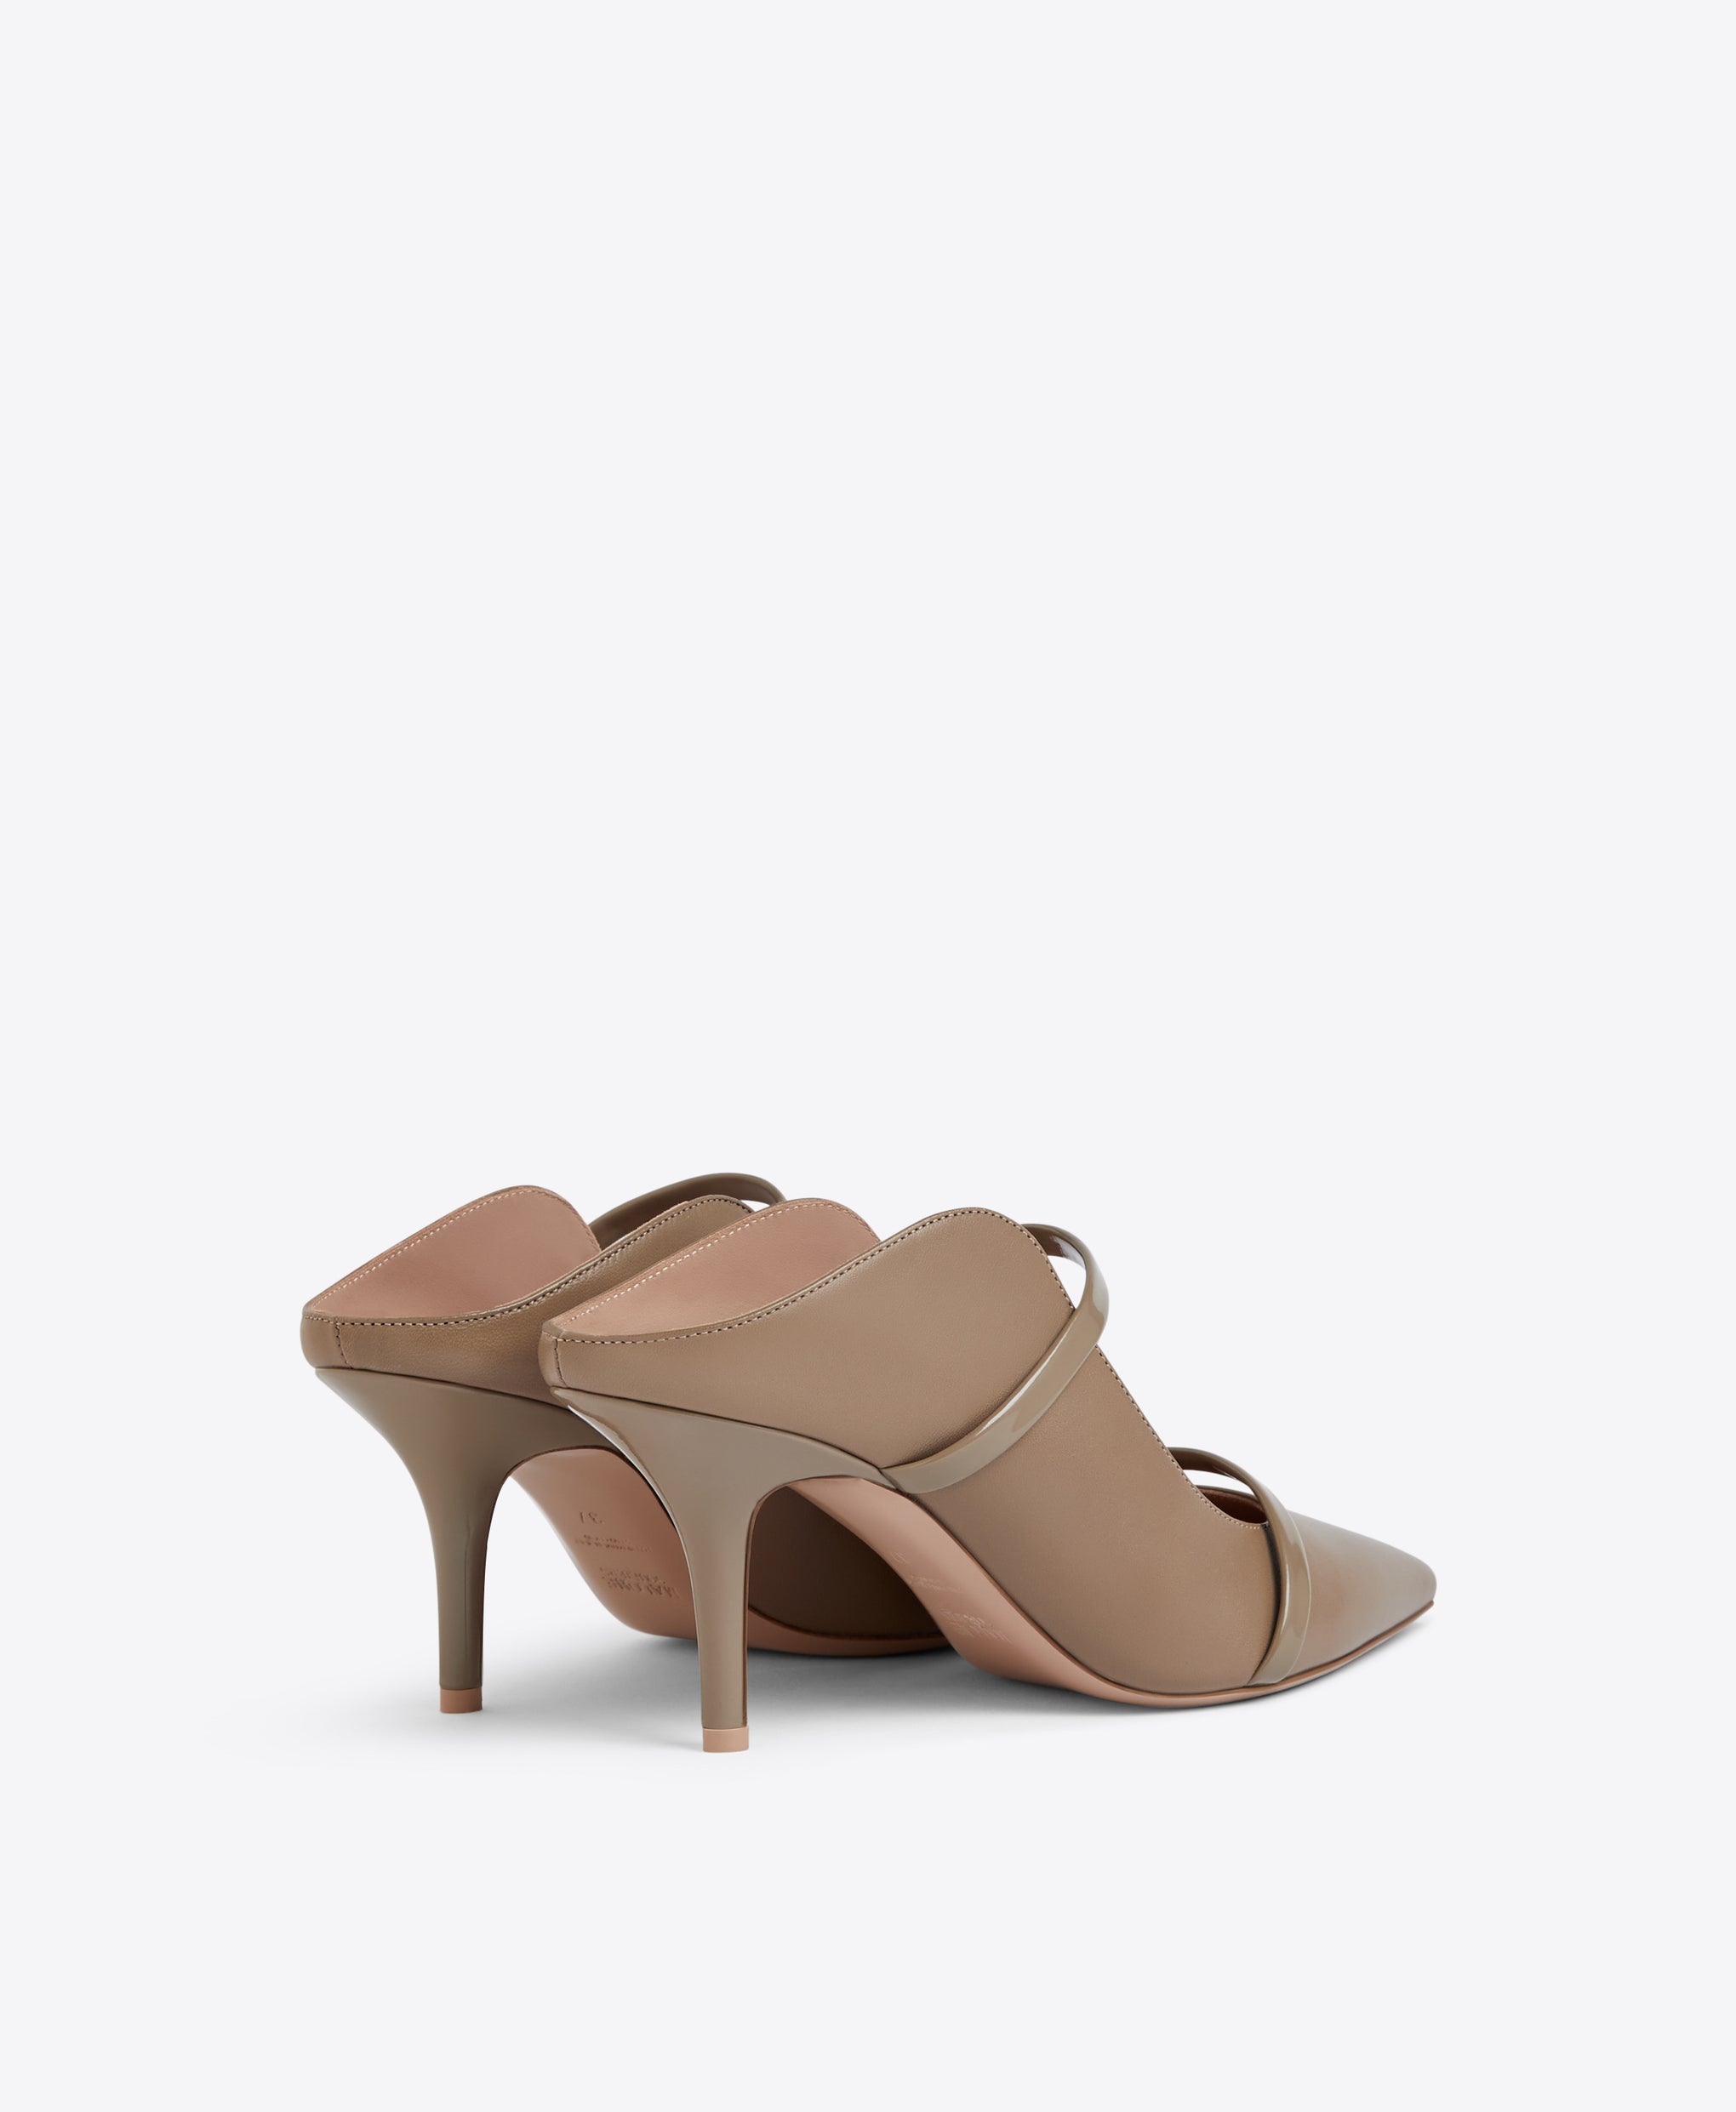 Malone Souliers Maureen 70 Taupe Leather Heeled Mules